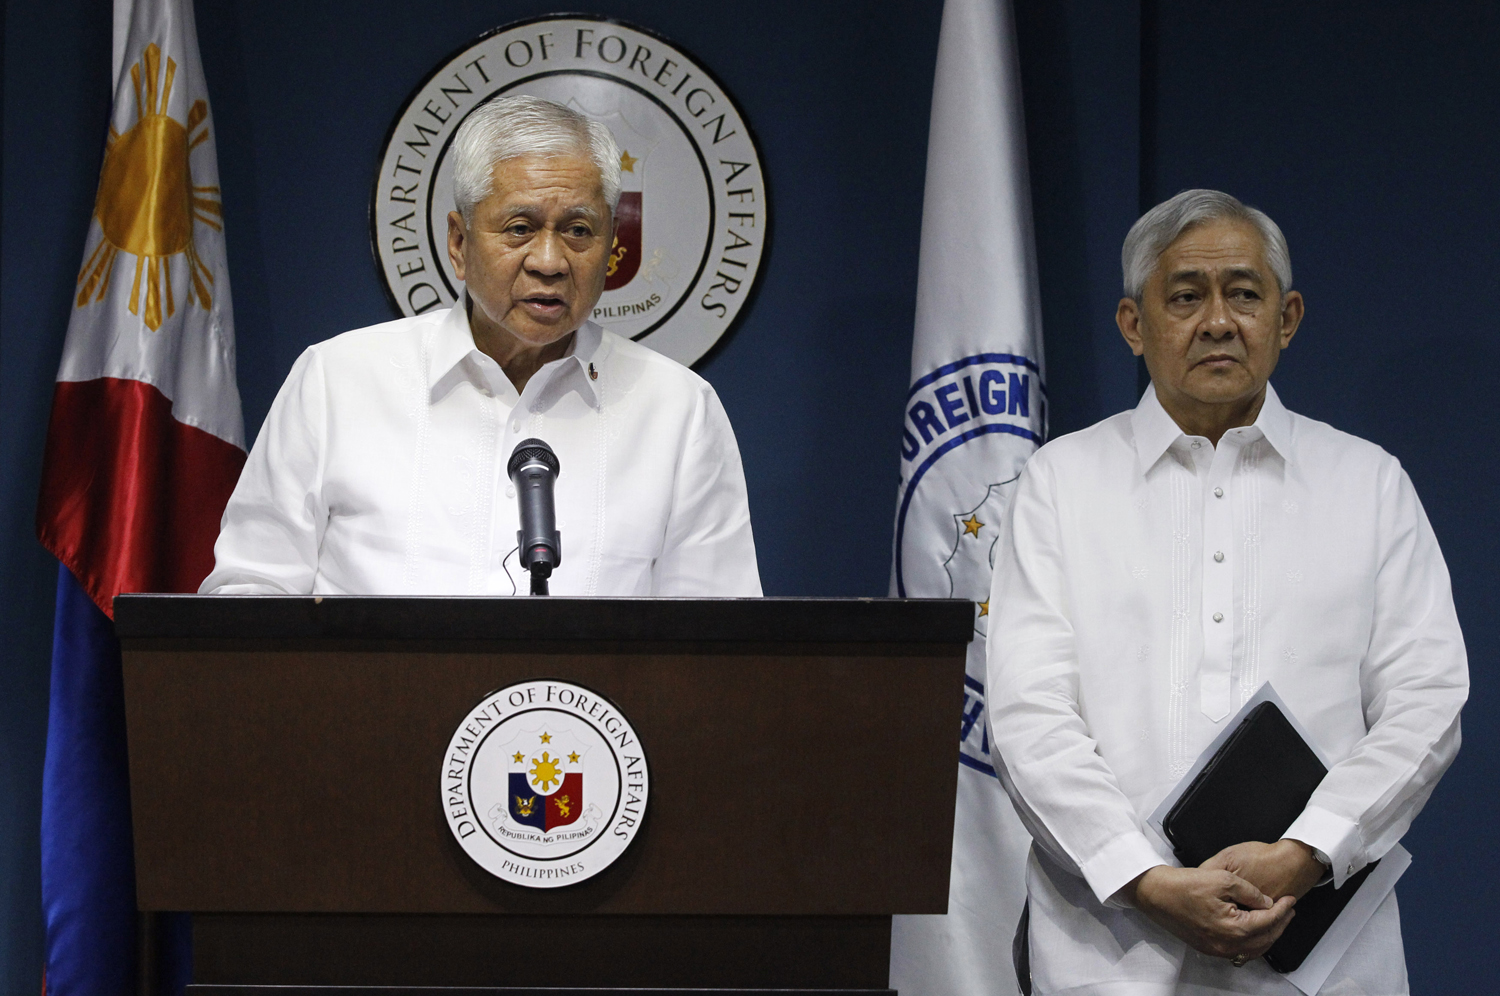 Philippine Foreign Secretary Albert del Rosario (L) stands next to Solicitor General Francis Jardeleza during a news conference in Manila March 30, 2014. (Romeo Ranoco - Reuters)